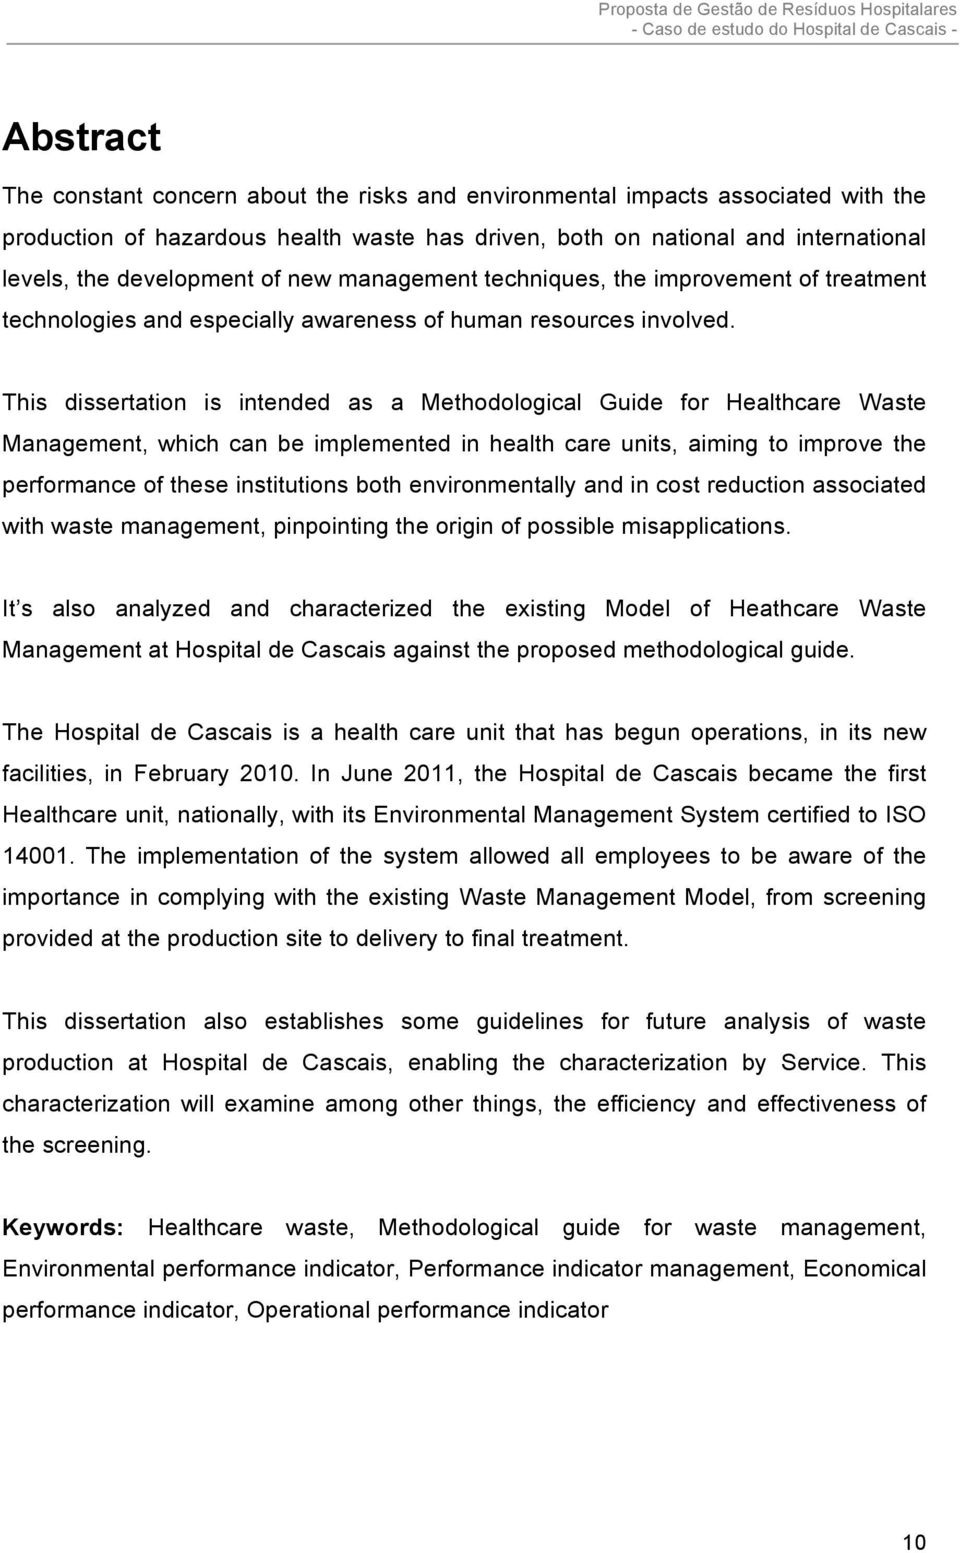 This dissertation is intended as a Methodological Guide for Healthcare Waste Management, which can be implemented in health care units, aiming to improve the performance of these institutions both